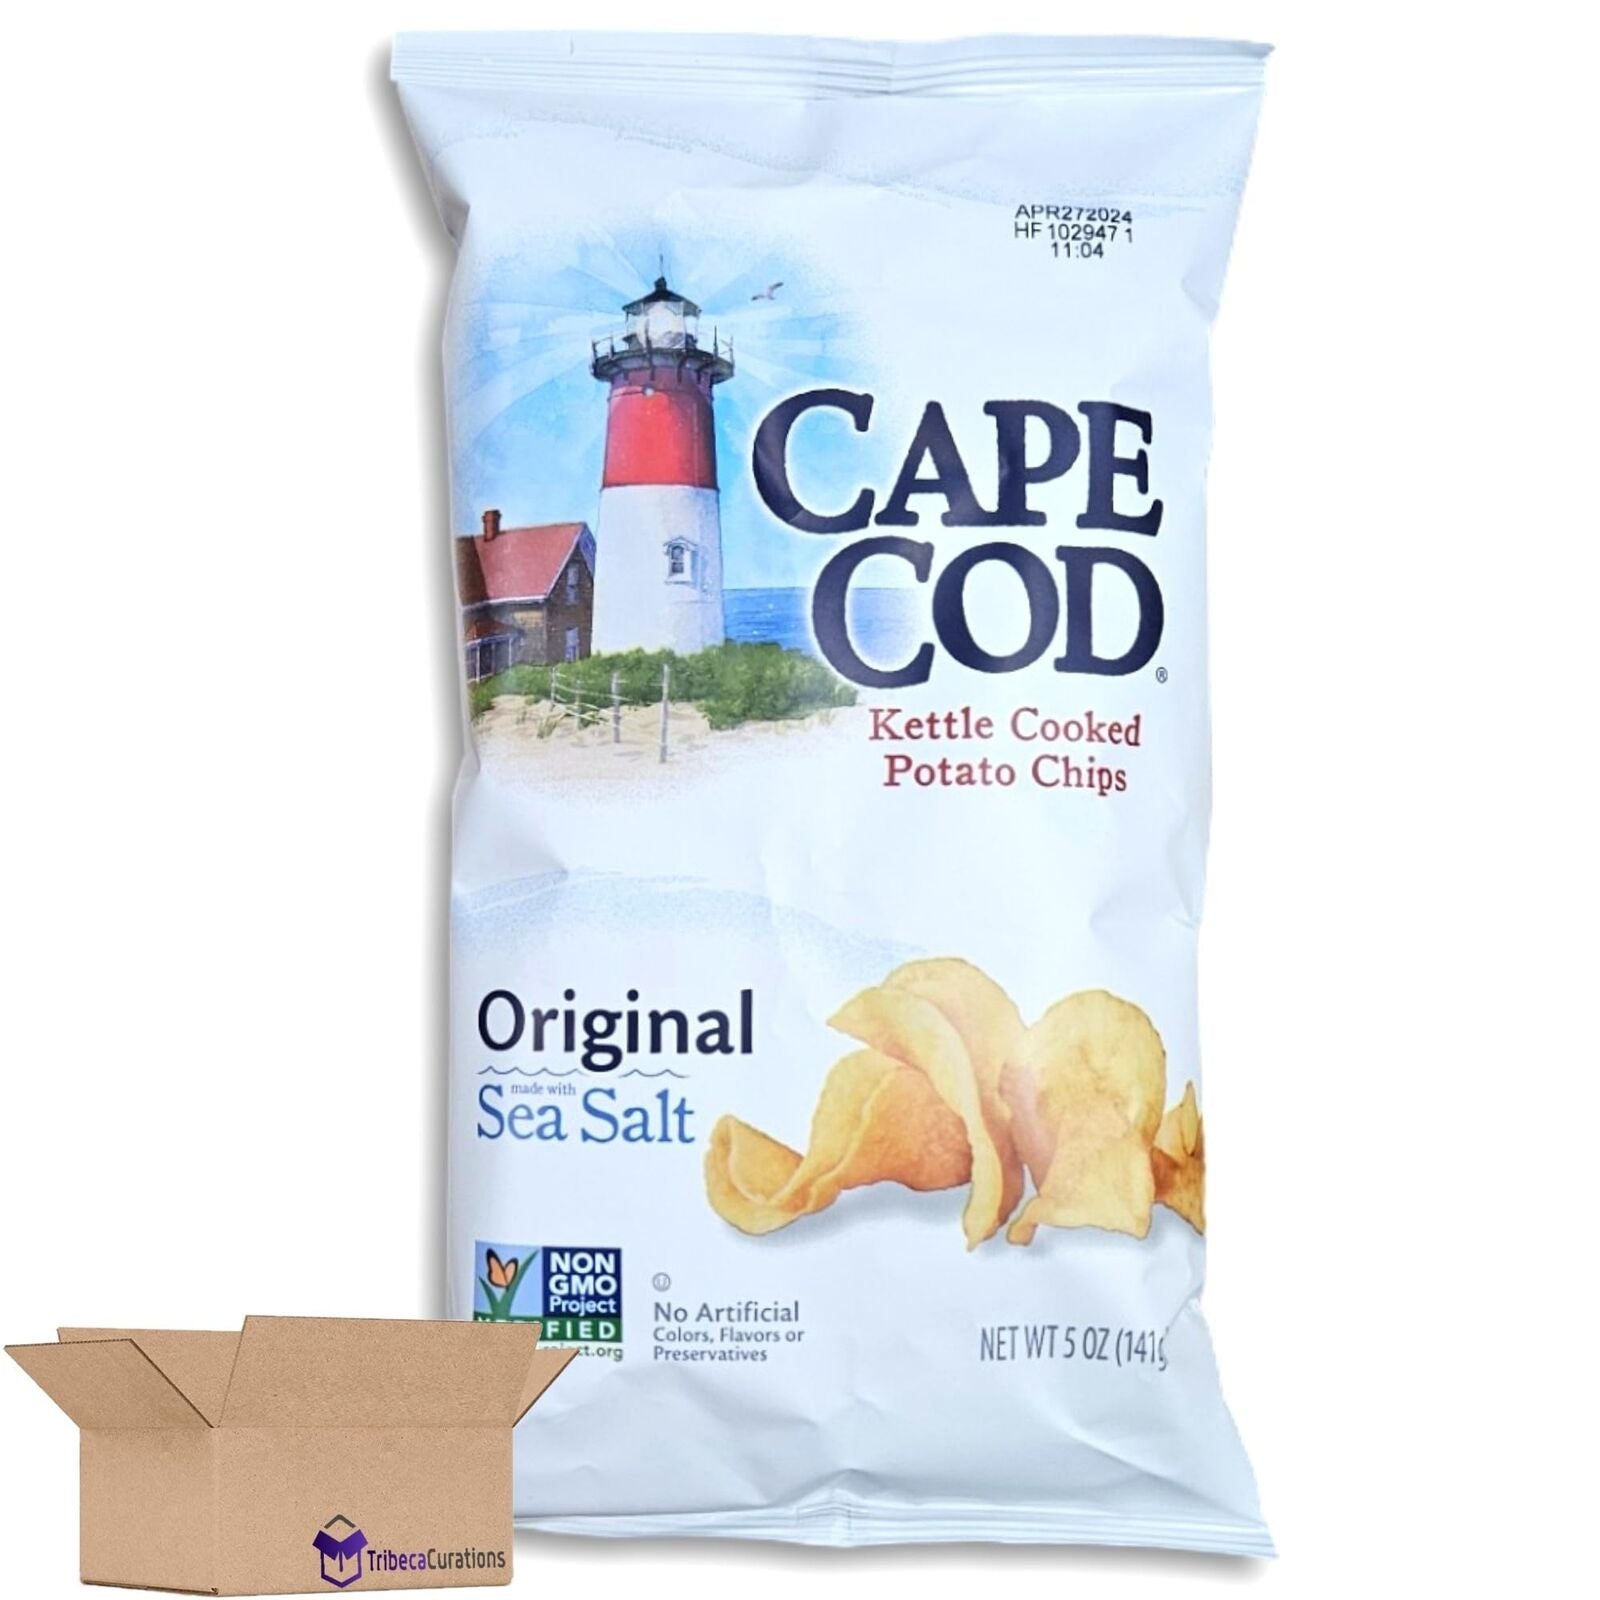 Cape Cod Kettle Cooked Potato Chips Value Pack | Bundled by Tribeca Curations,